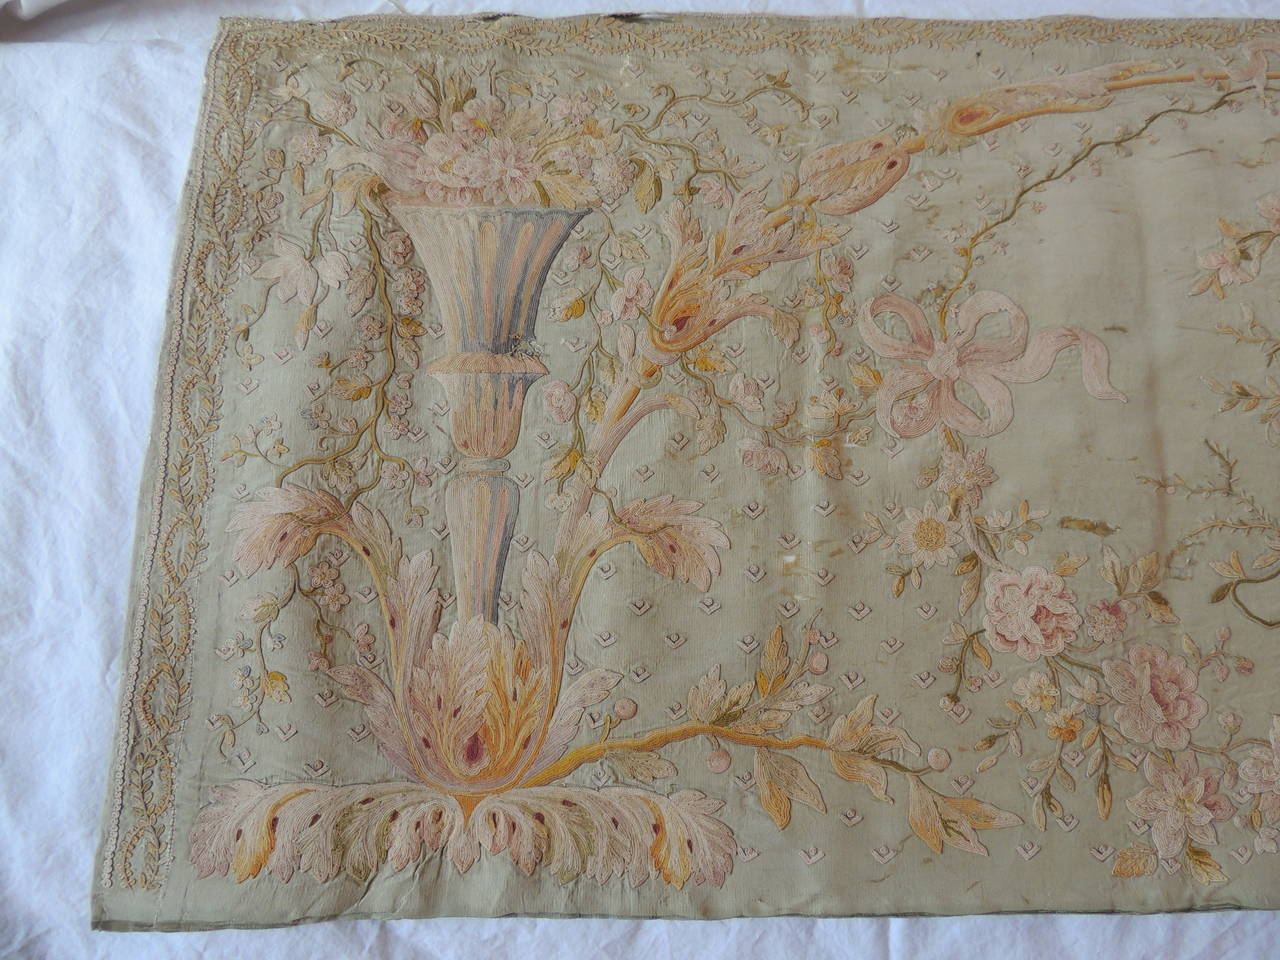 Italian Collection of Antique Textiles 18th Century Embroidery Panel